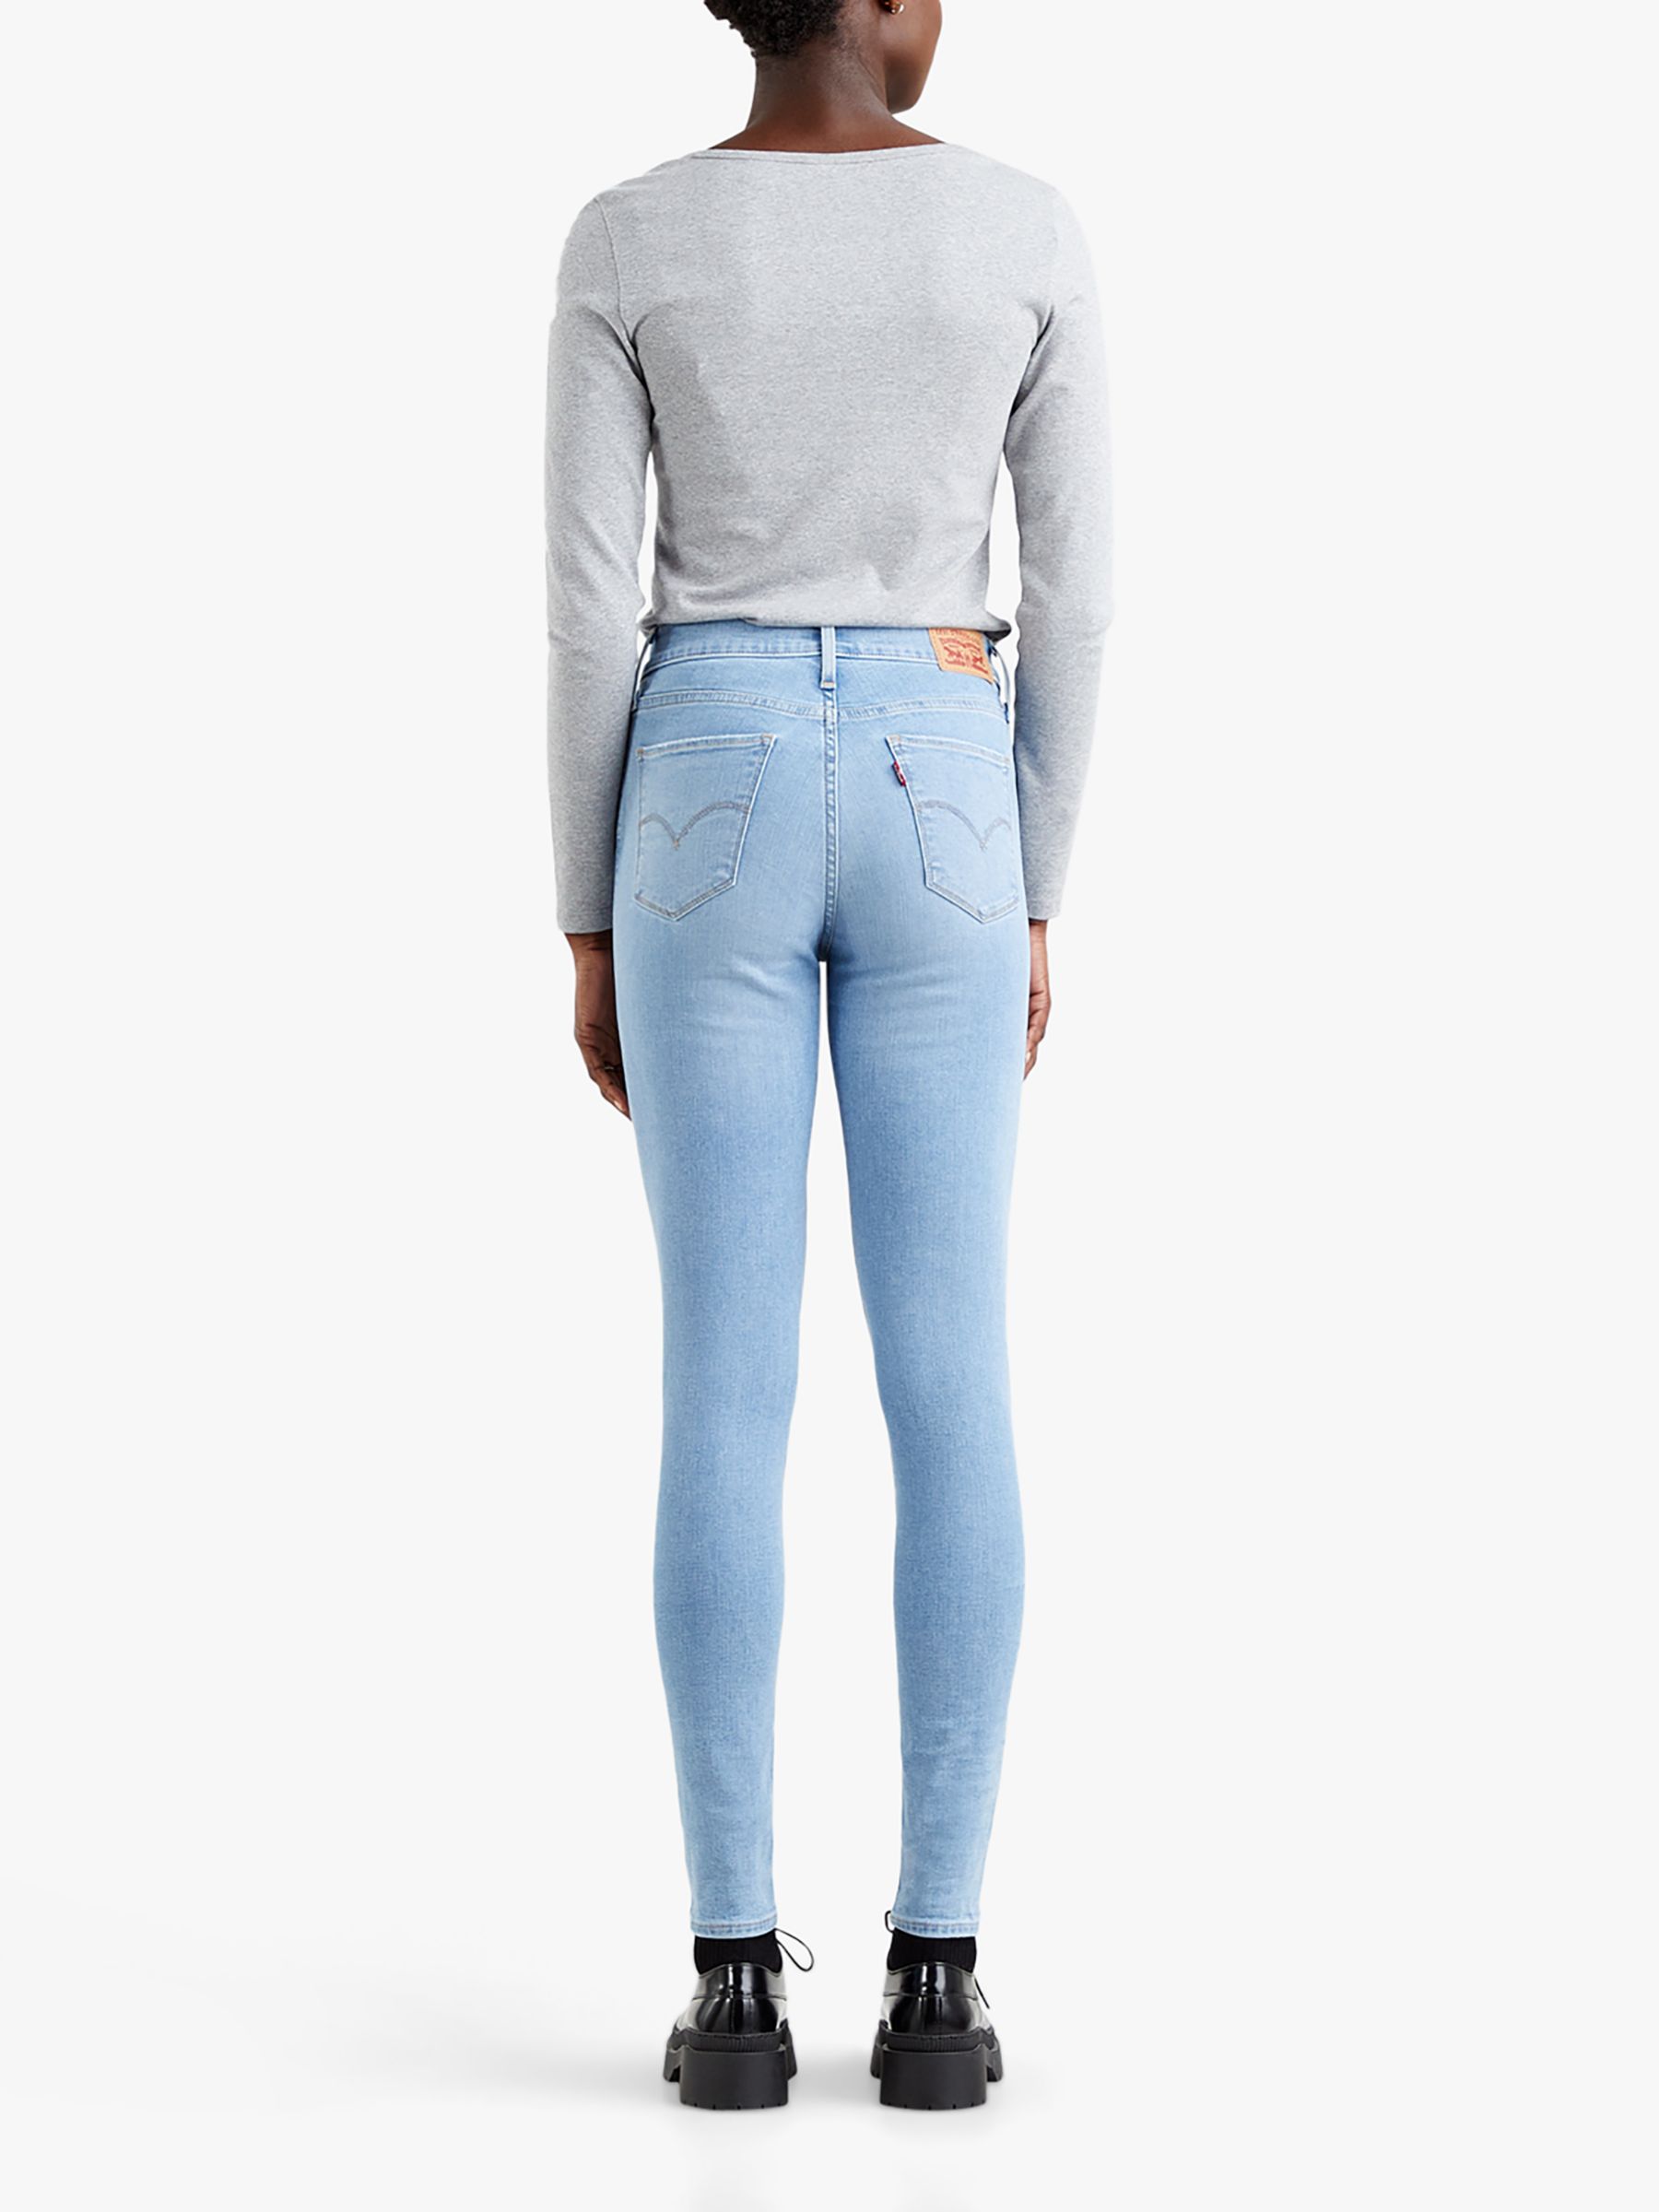 Levi's 310 Shaping Super Skinny Jeans, Ontario Ripper